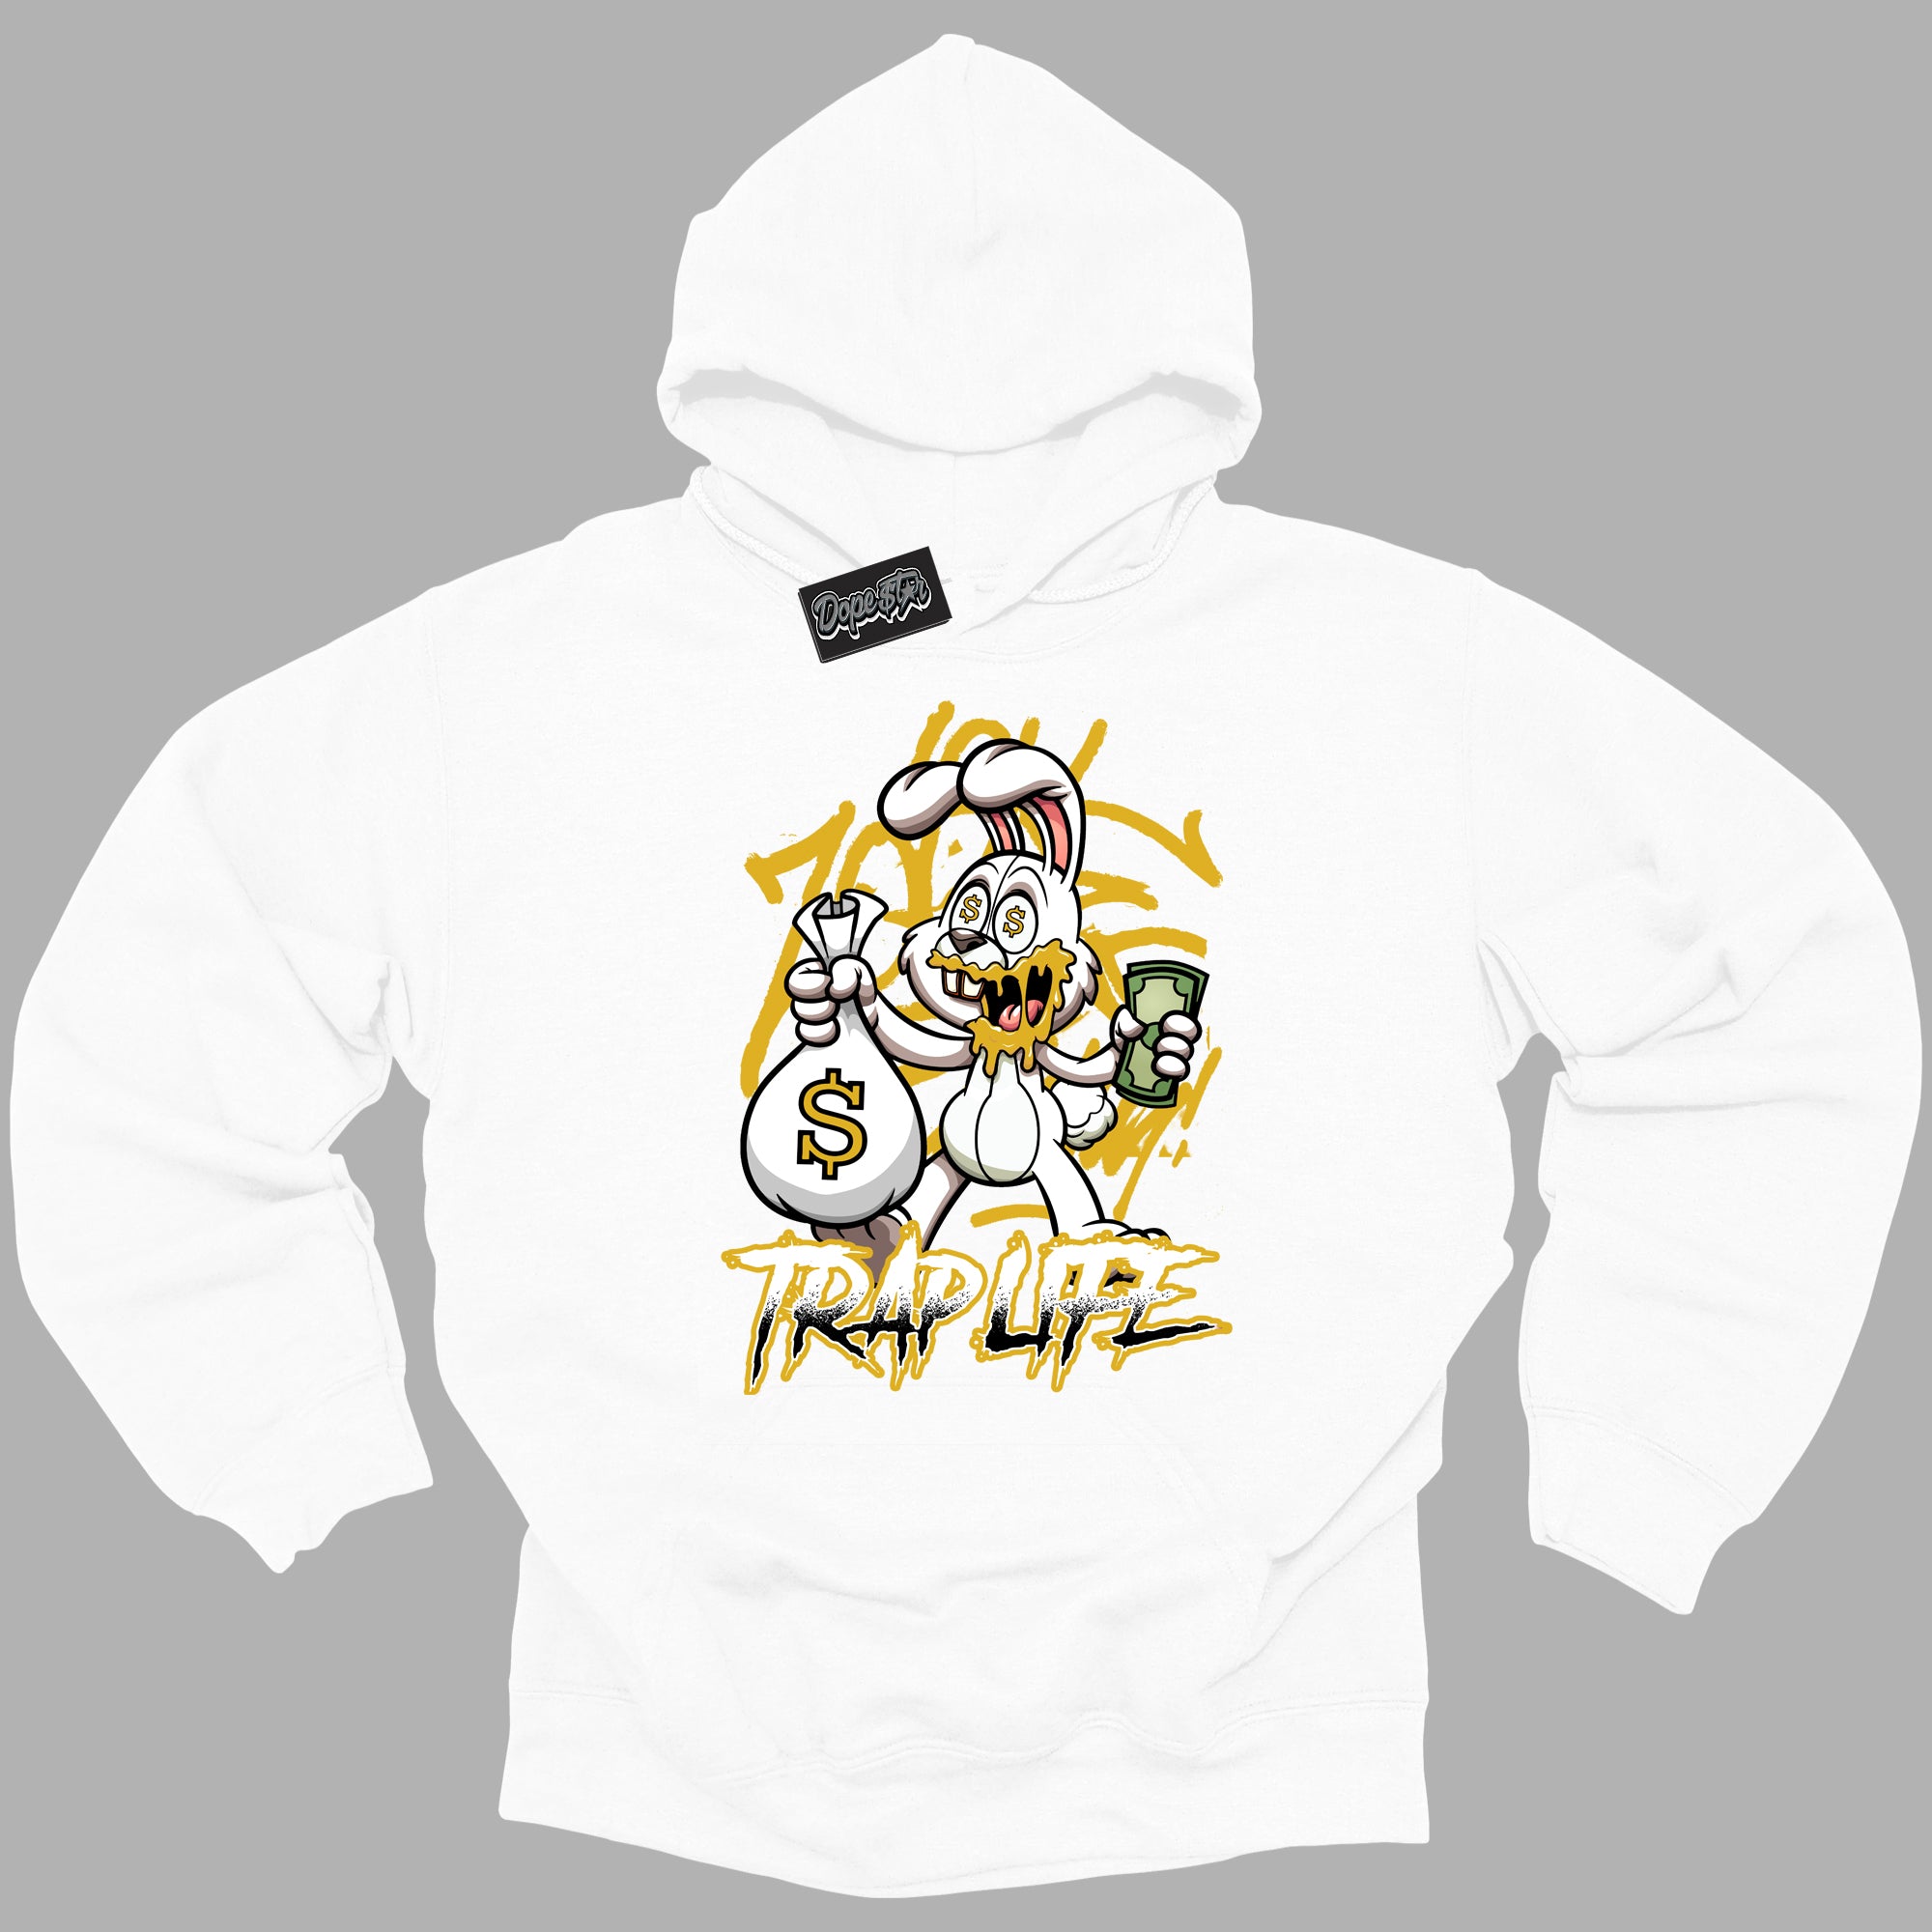 Cool White Hoodie with “ Trap Rabbit ”  design that Perfectly Matches Yellow Ochre 6s Sneakers.